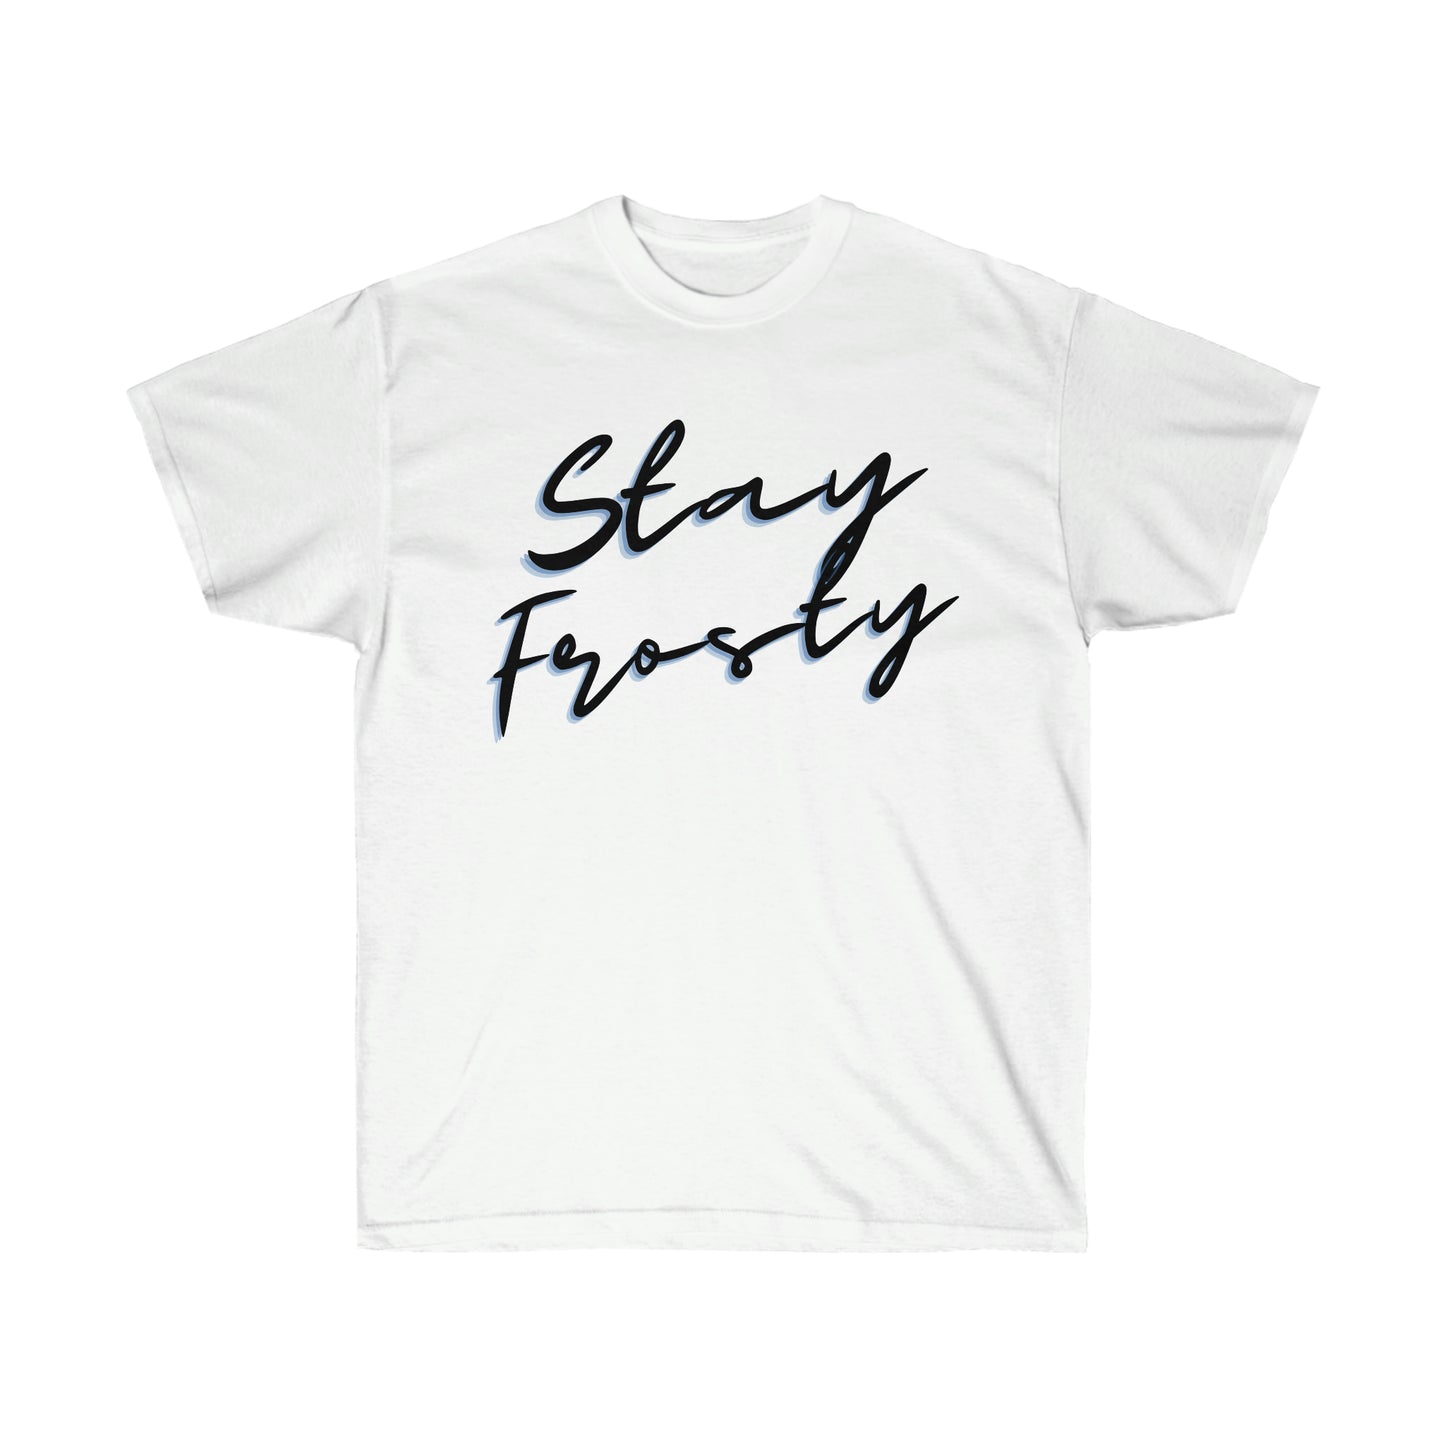 a Stay Frosty Weed T-Shirt that says stay frosty.